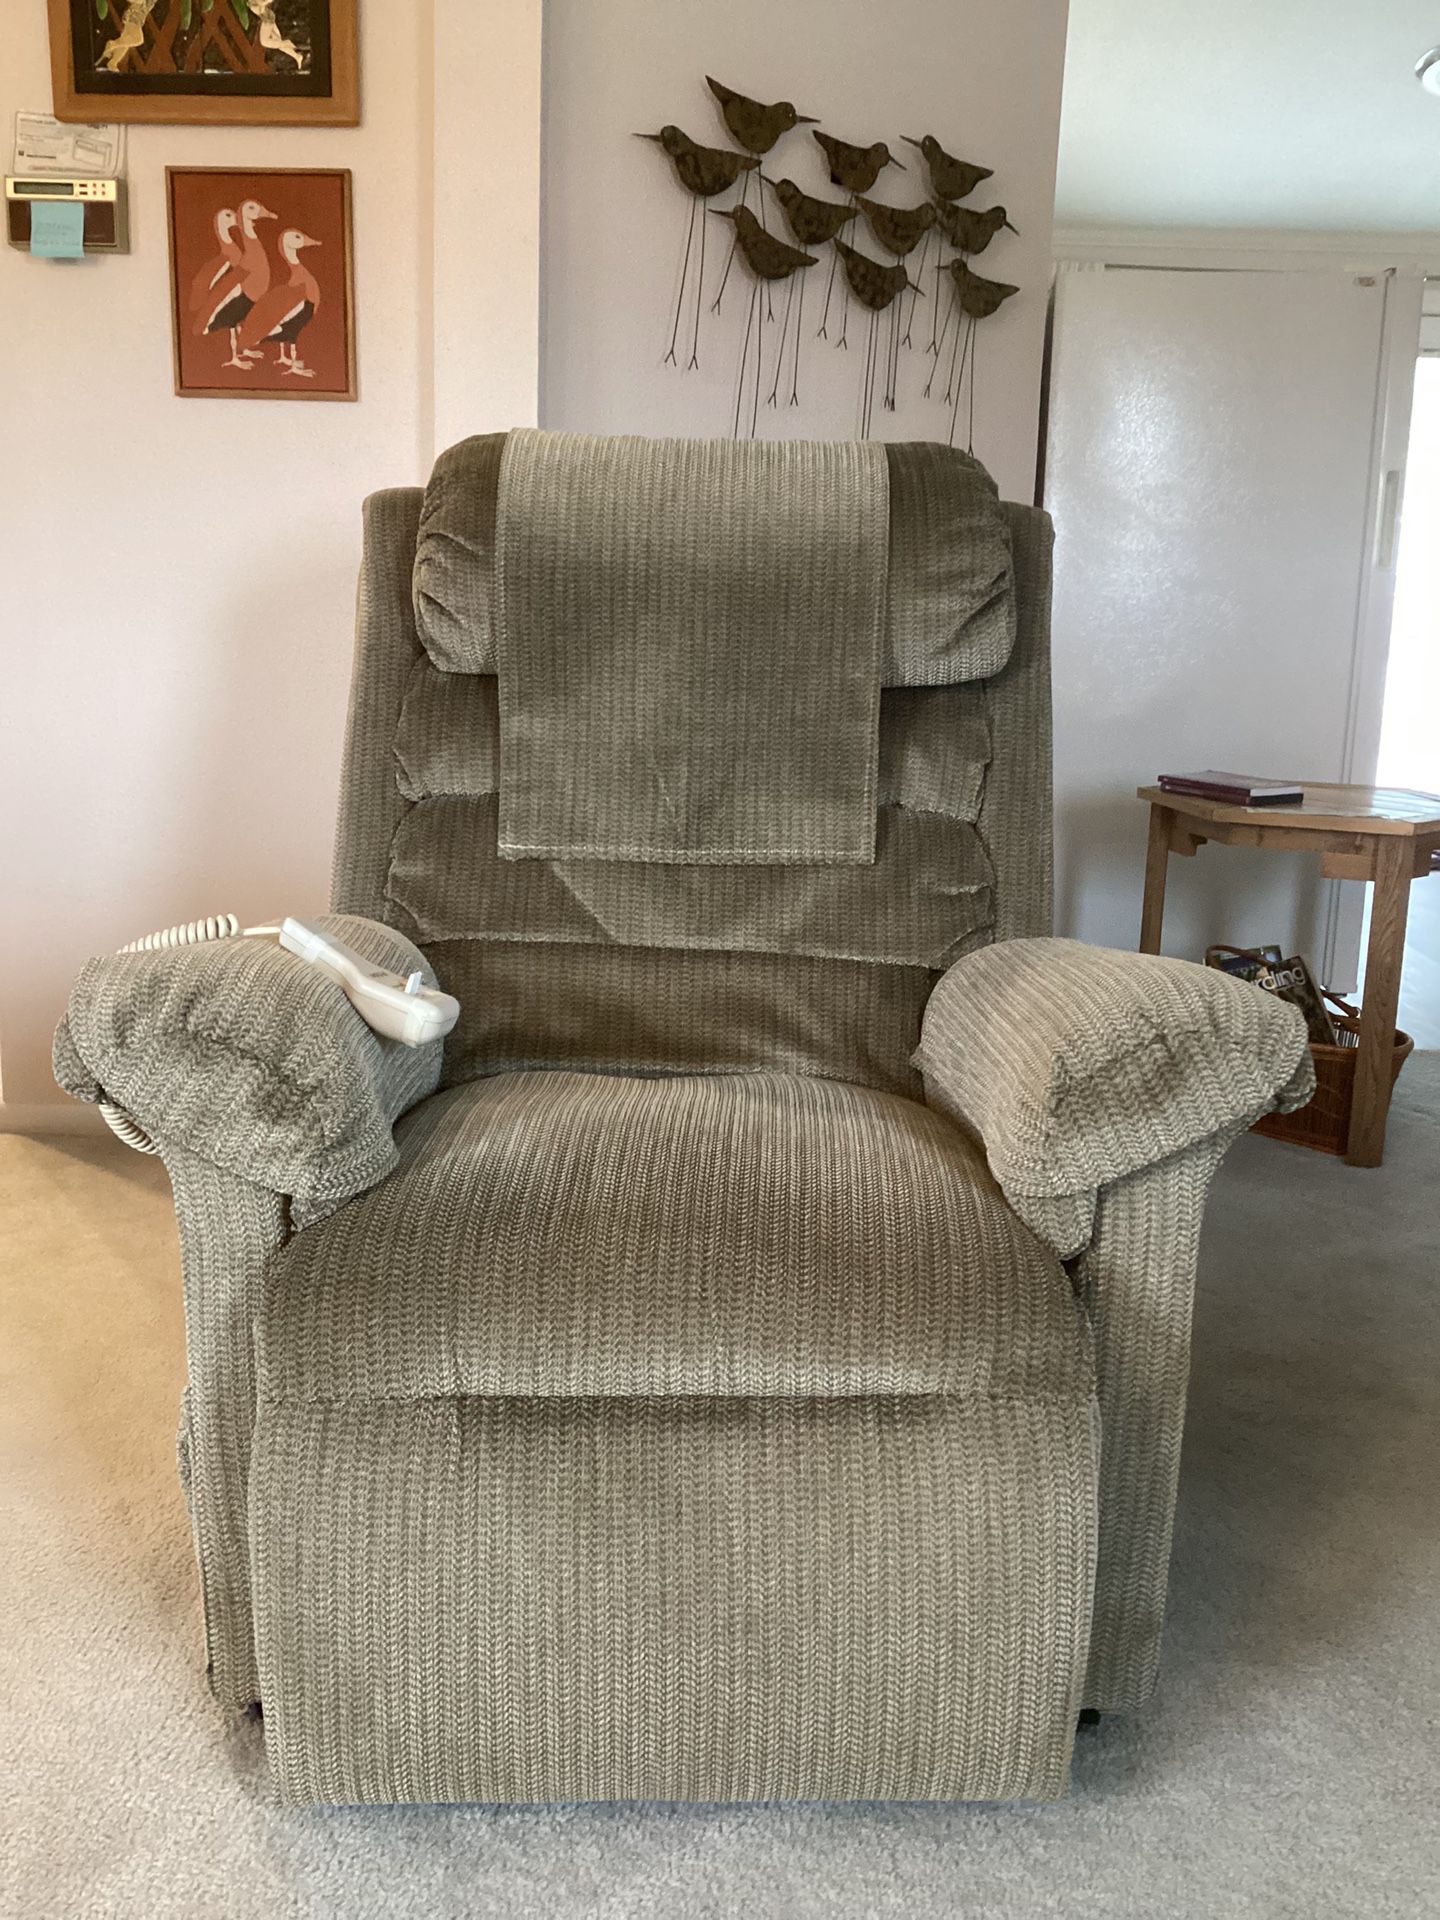 Lift Recliner In Great Condition!